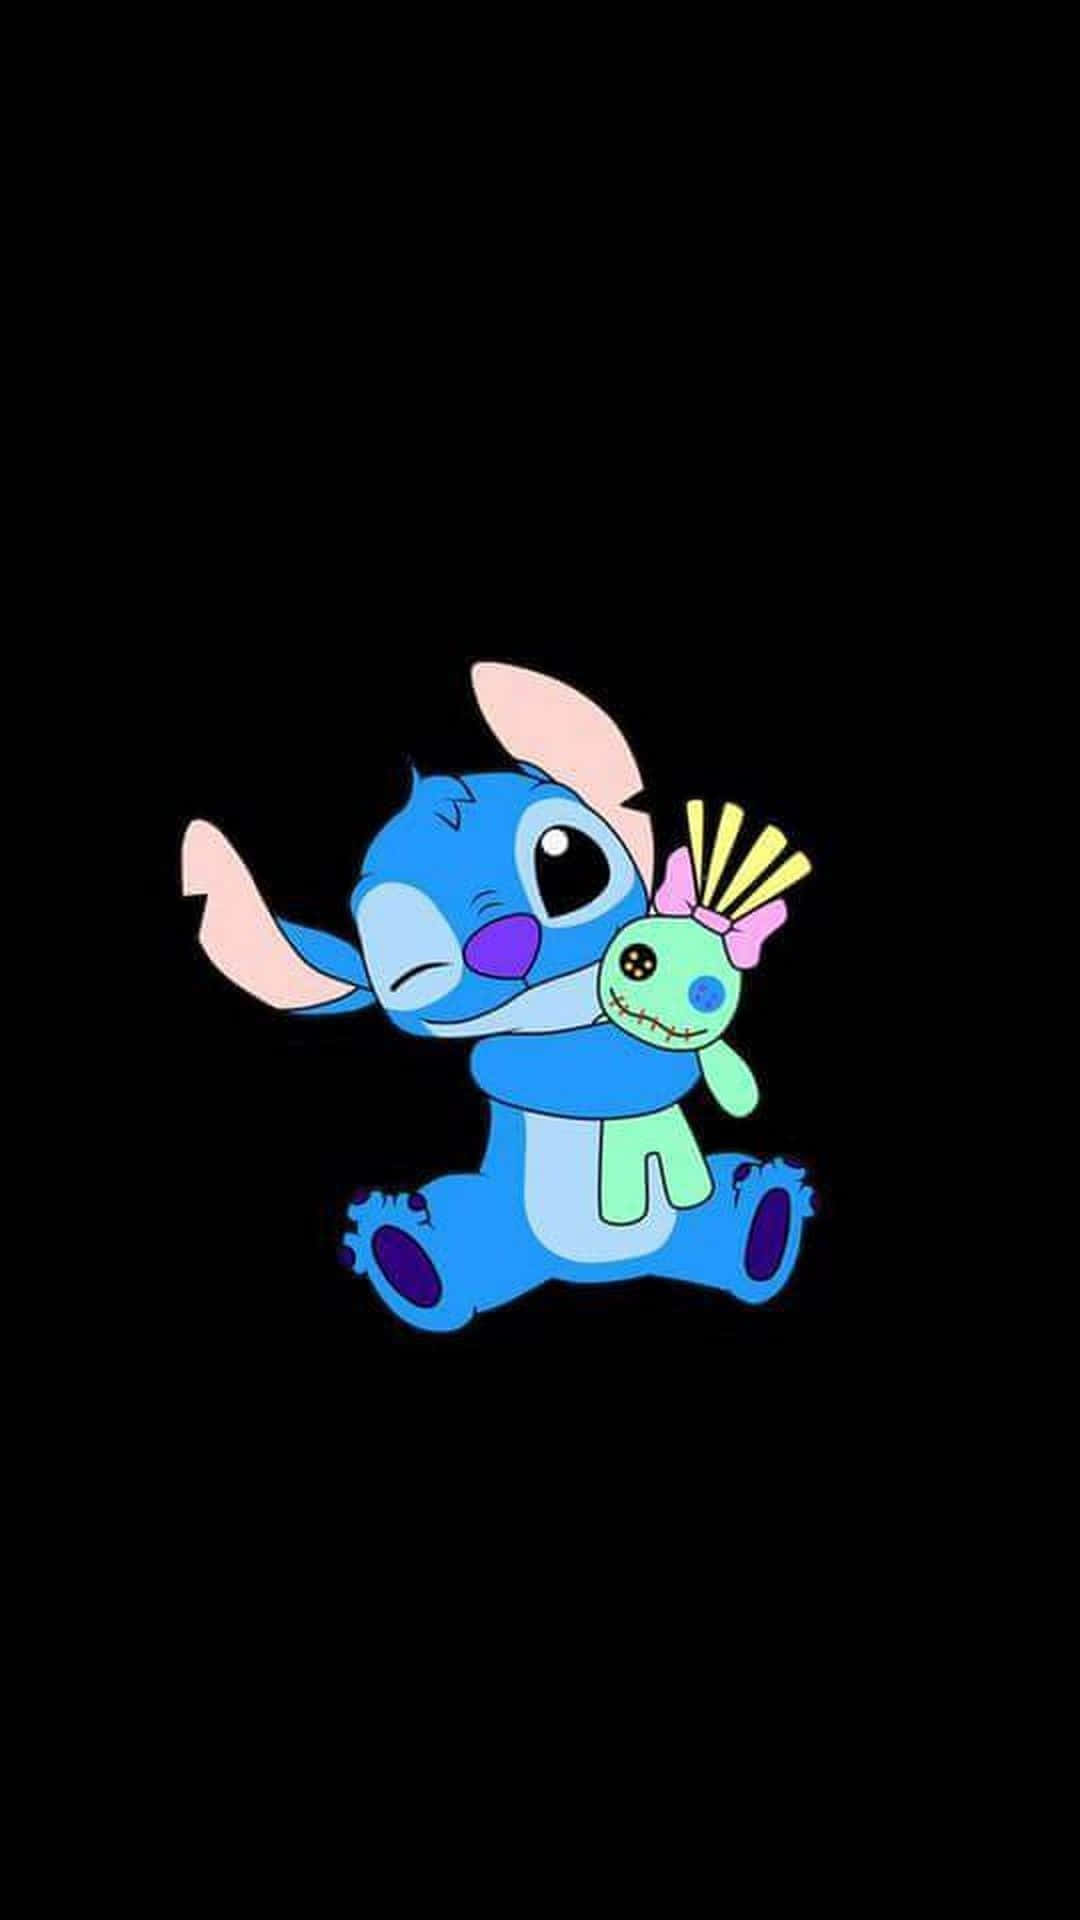 Cute Baby Stitch With Bear Wallpaper